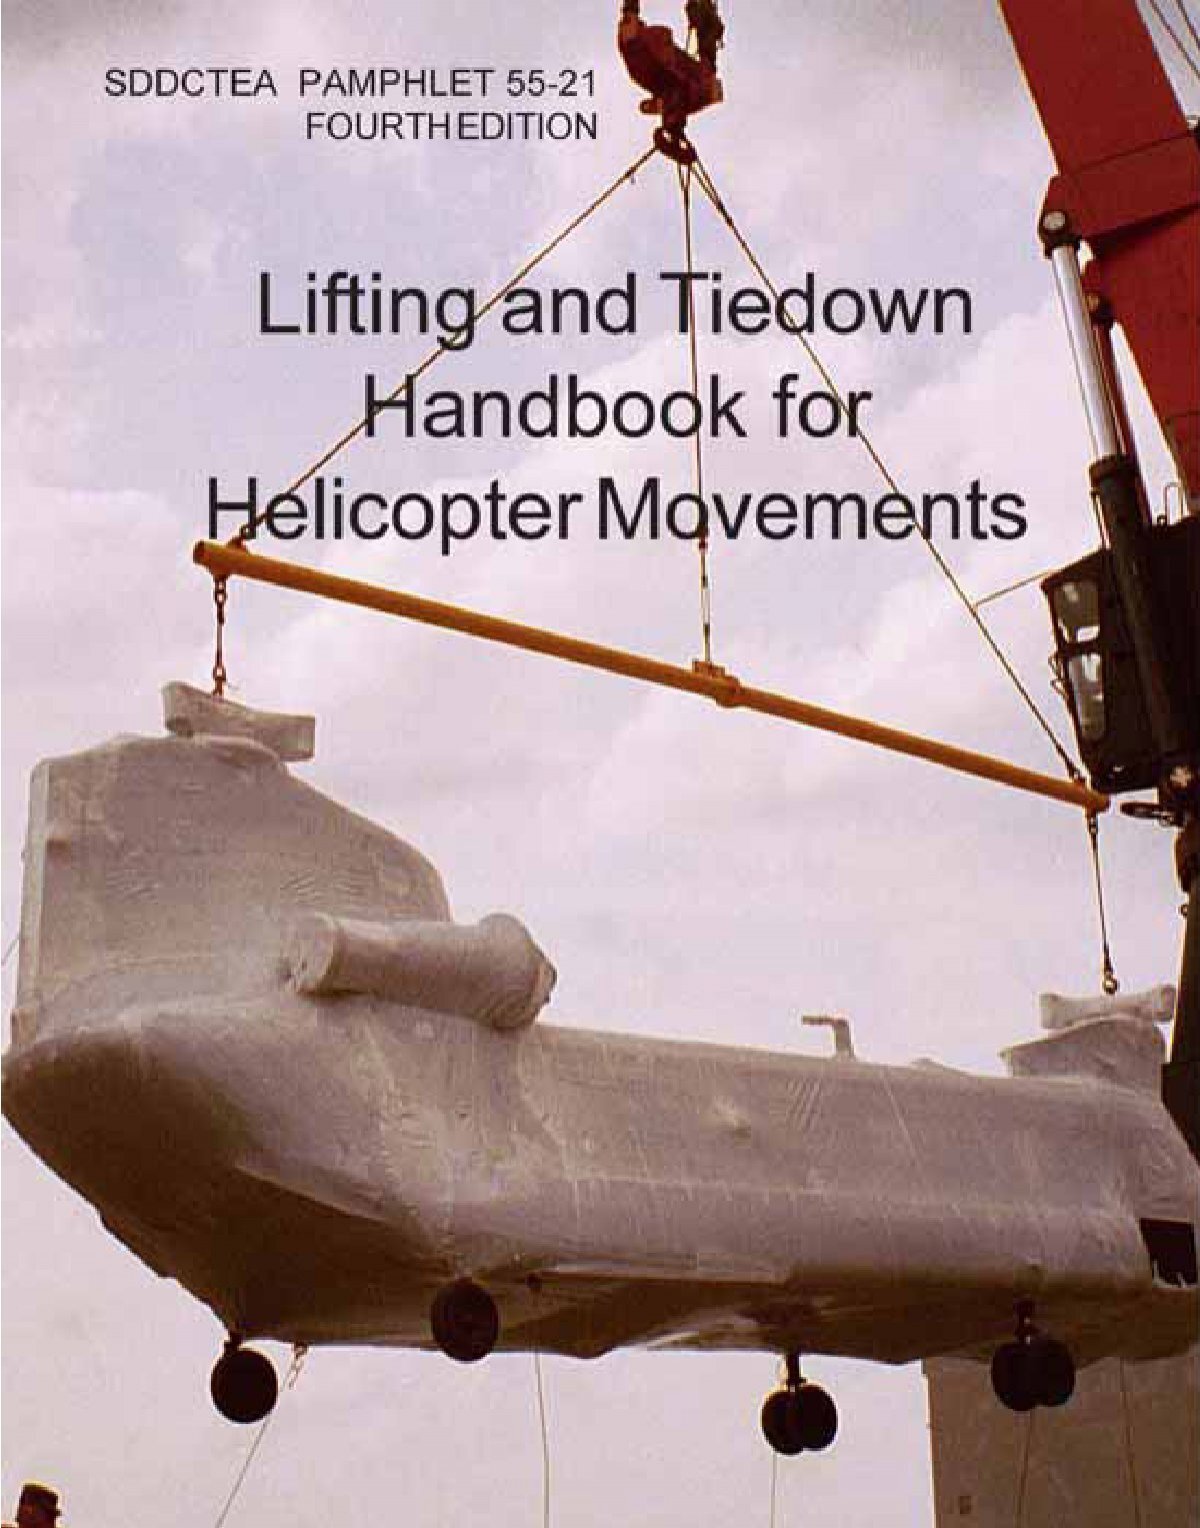 SDDCTEA PAMPHLET 55-21 - Military Surface Deployment and